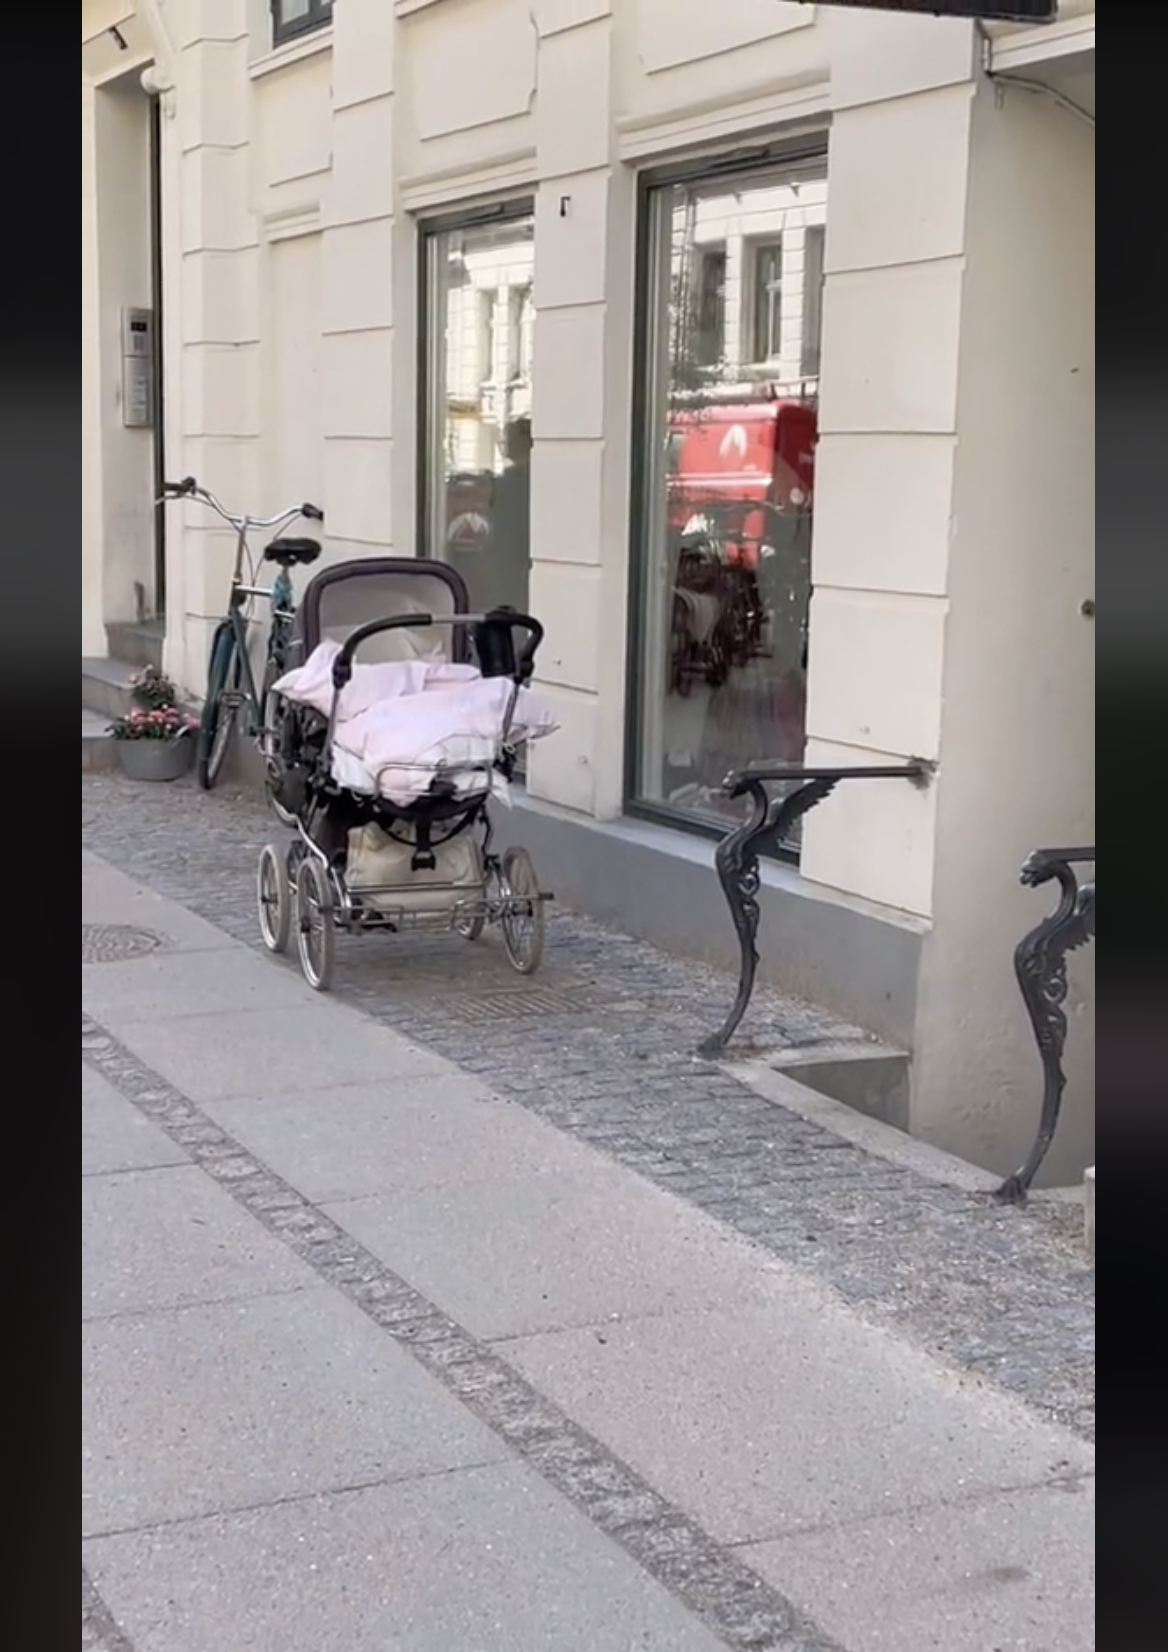 Annie Samples' baby girl's stroller is placed outside a store in Copenhagen, Denmark, as seen in a video dated September 27, 2022 | Source: tiktok.com/@annieineventyrland